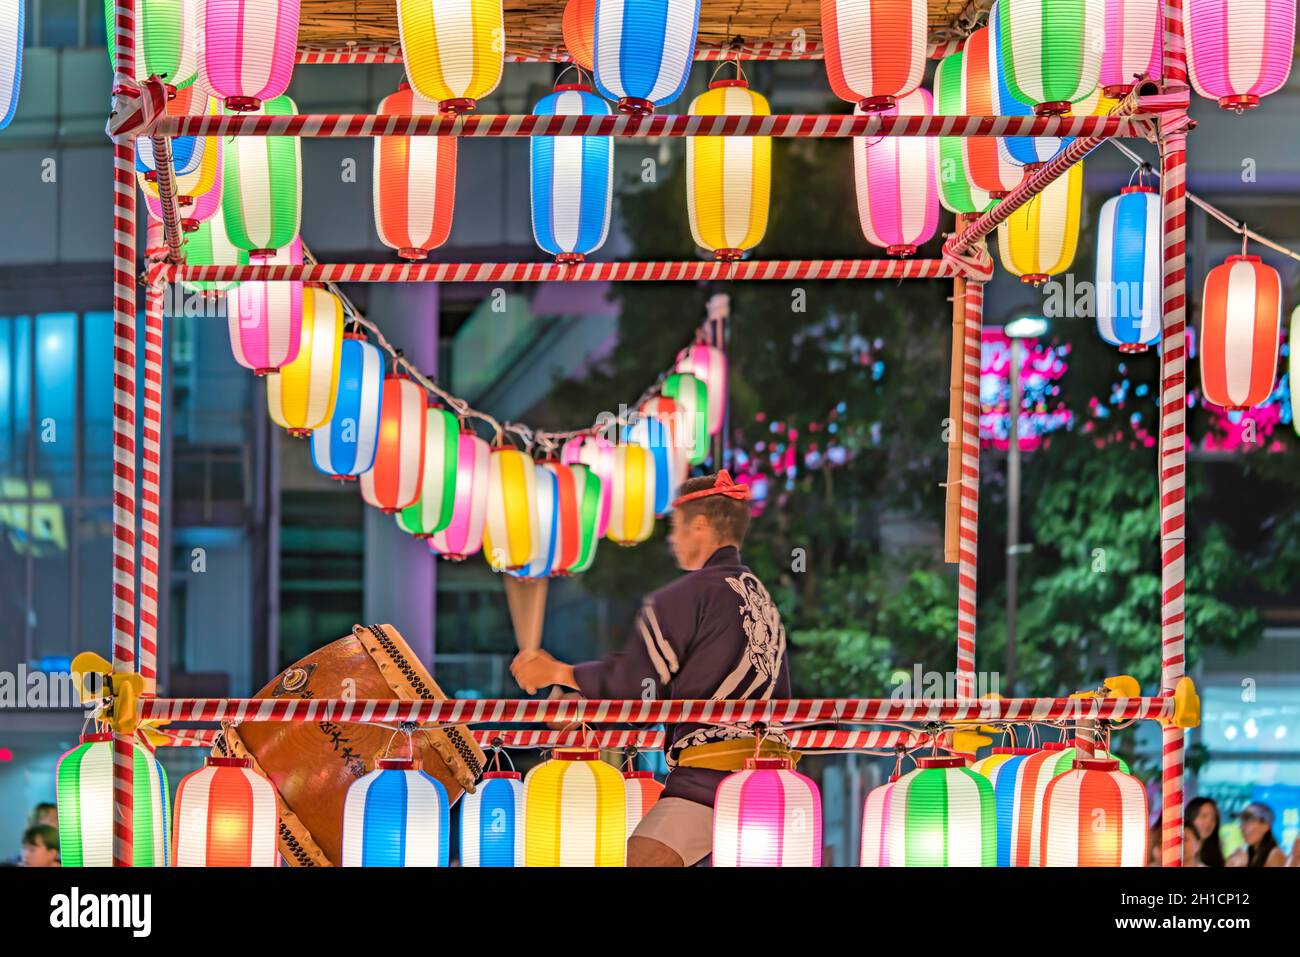 View of the square in front of the Nippori train station decorated for the Obon festival with a yagura tower illuminated with paper lanterns where a m Stock Photo